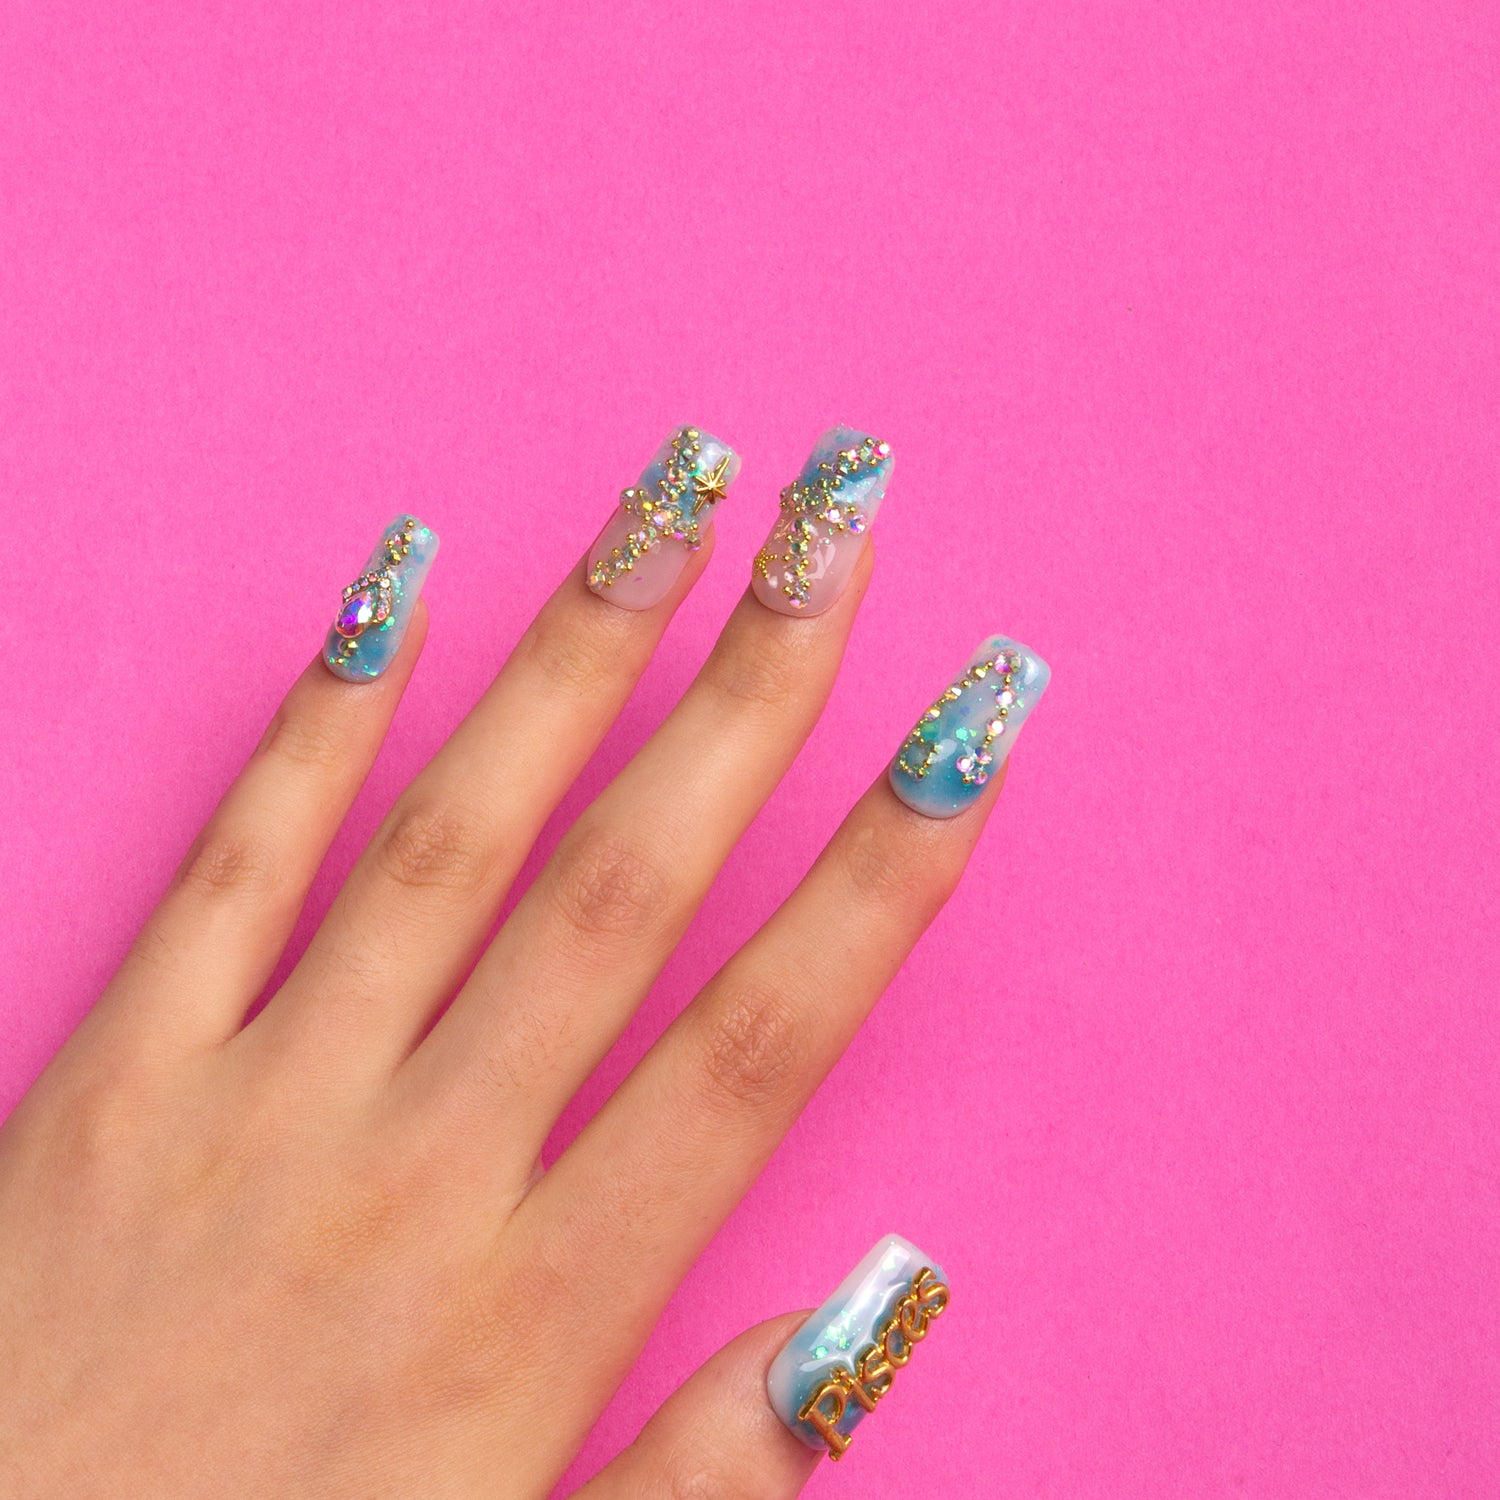 Pisces blue french tip Square nails H157 RTS